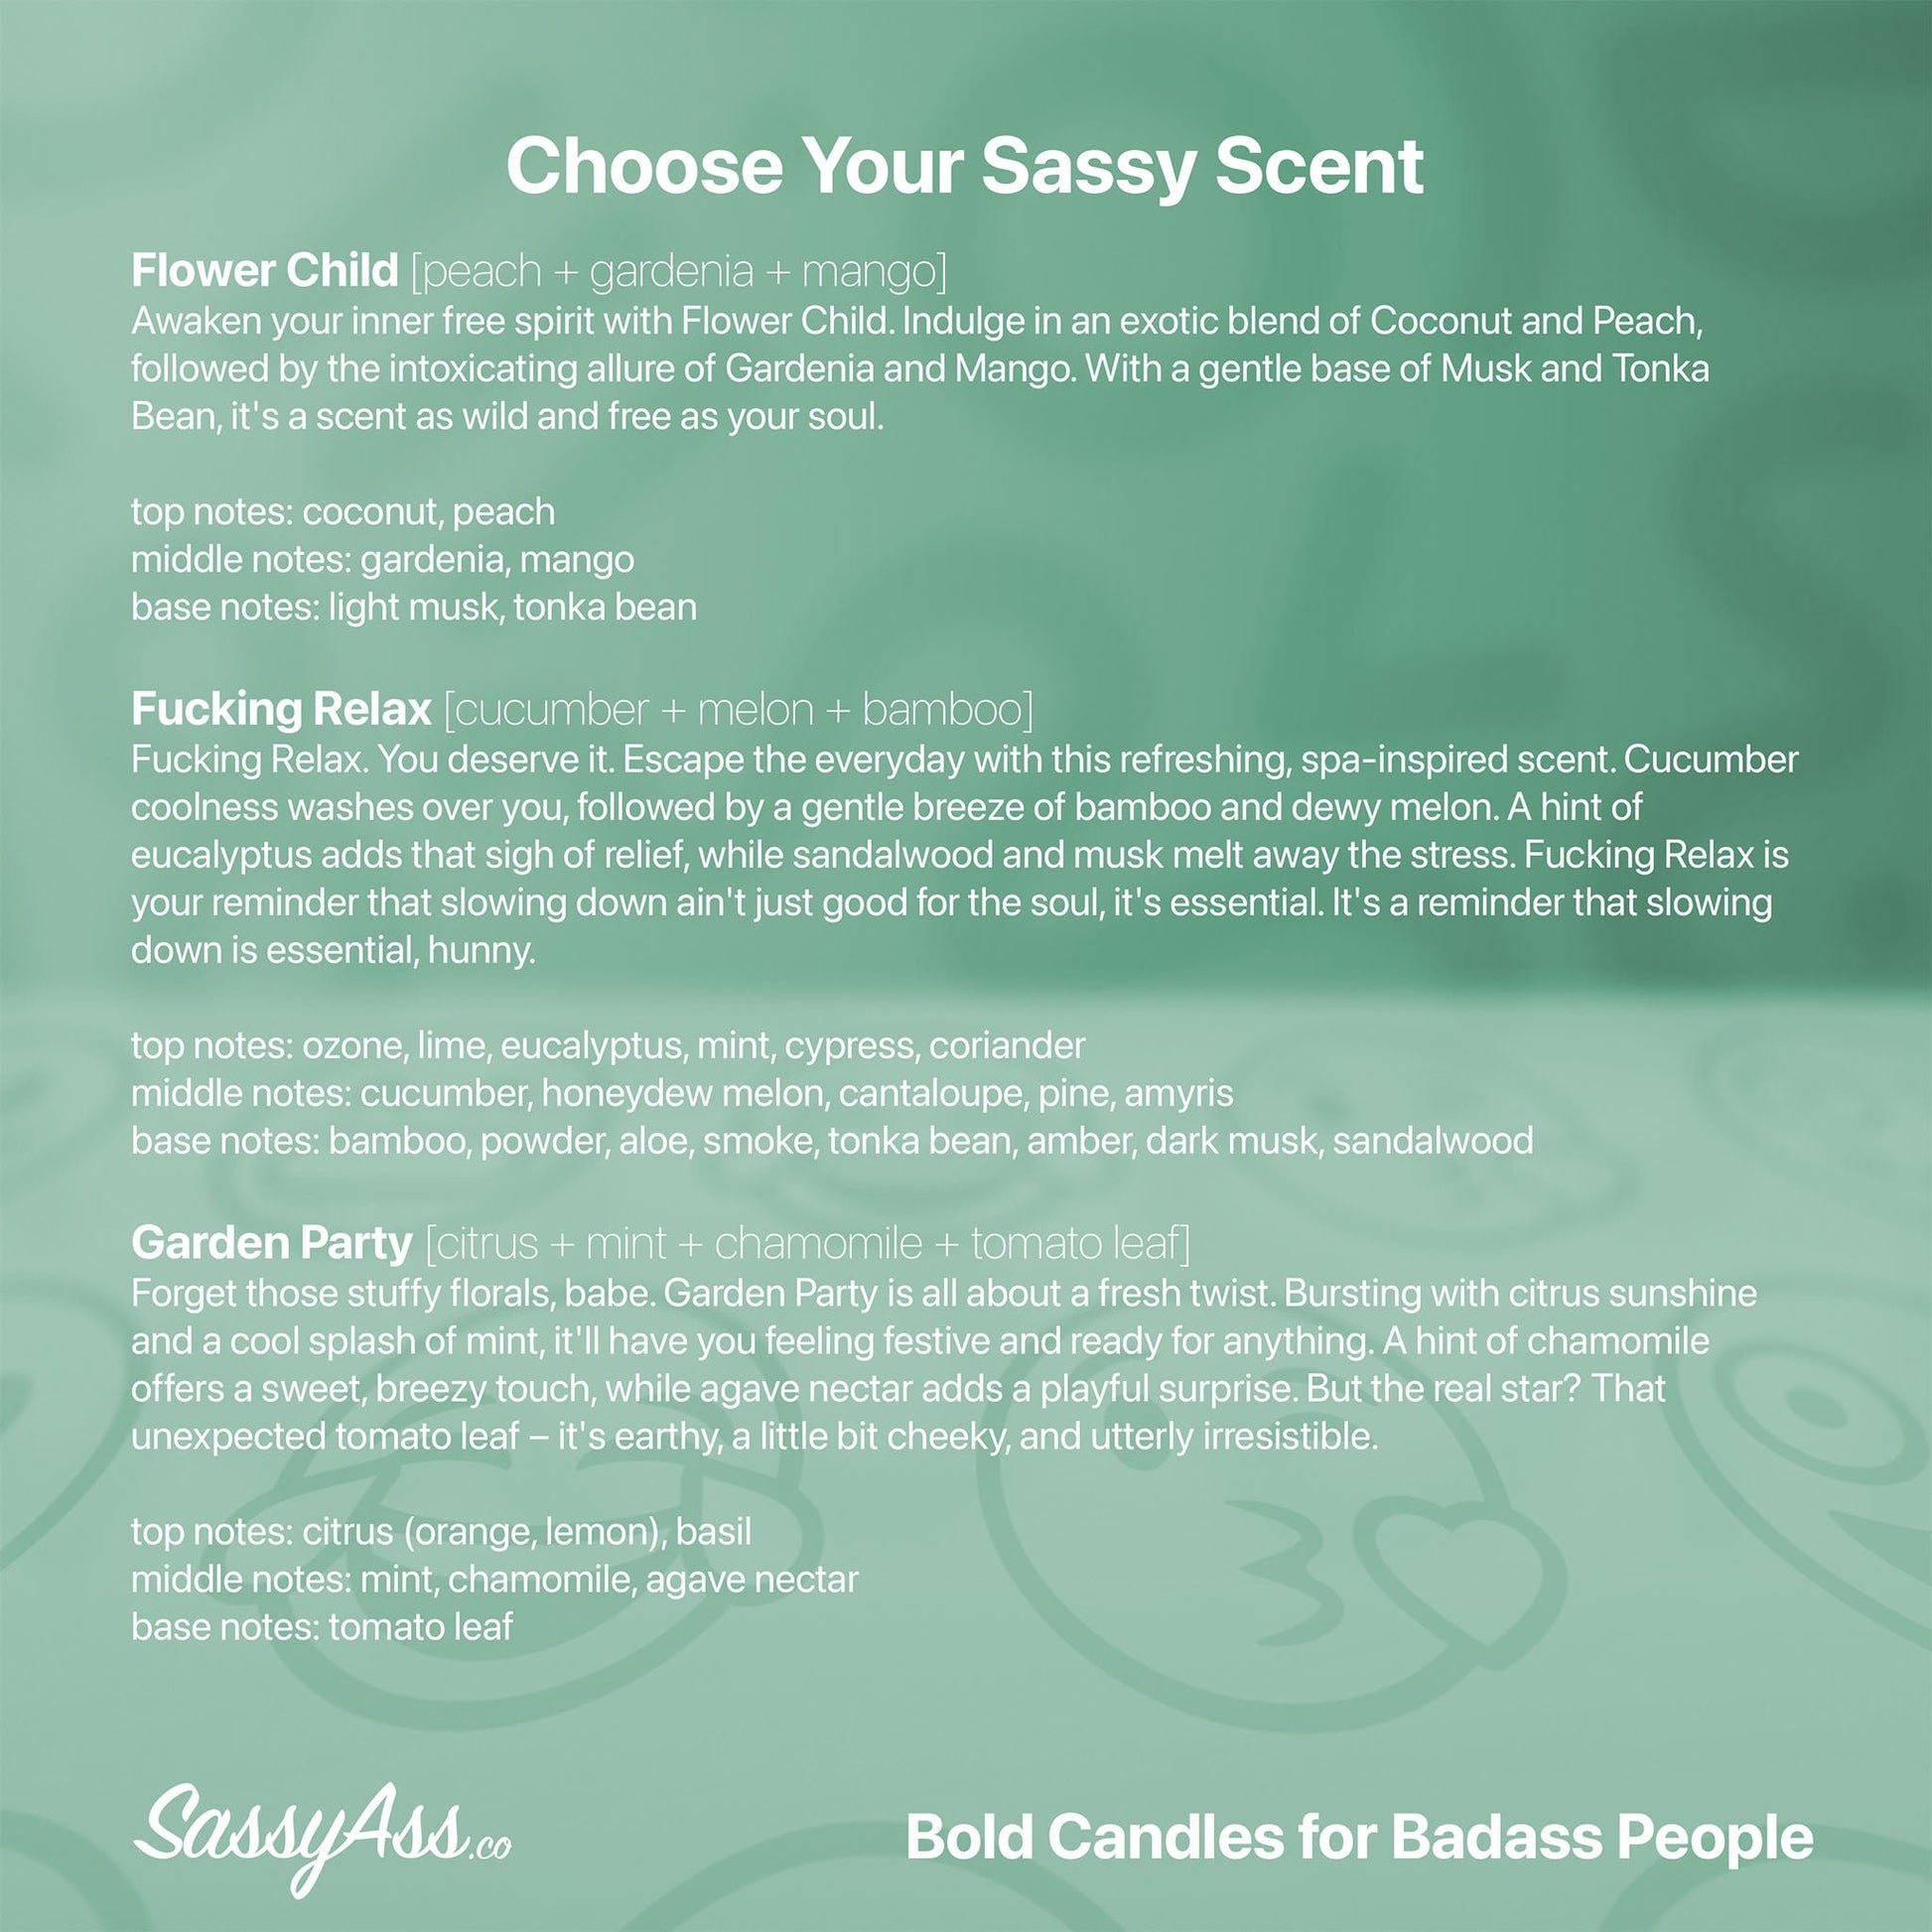 Are You High, Clairee? - Steel Magnolias Inspired Scented Soy Candle, Funny, Sassy, Handcrafted, Essential Oil Infused, - the back cover of the book choose your sassy scent - SassyAss.co